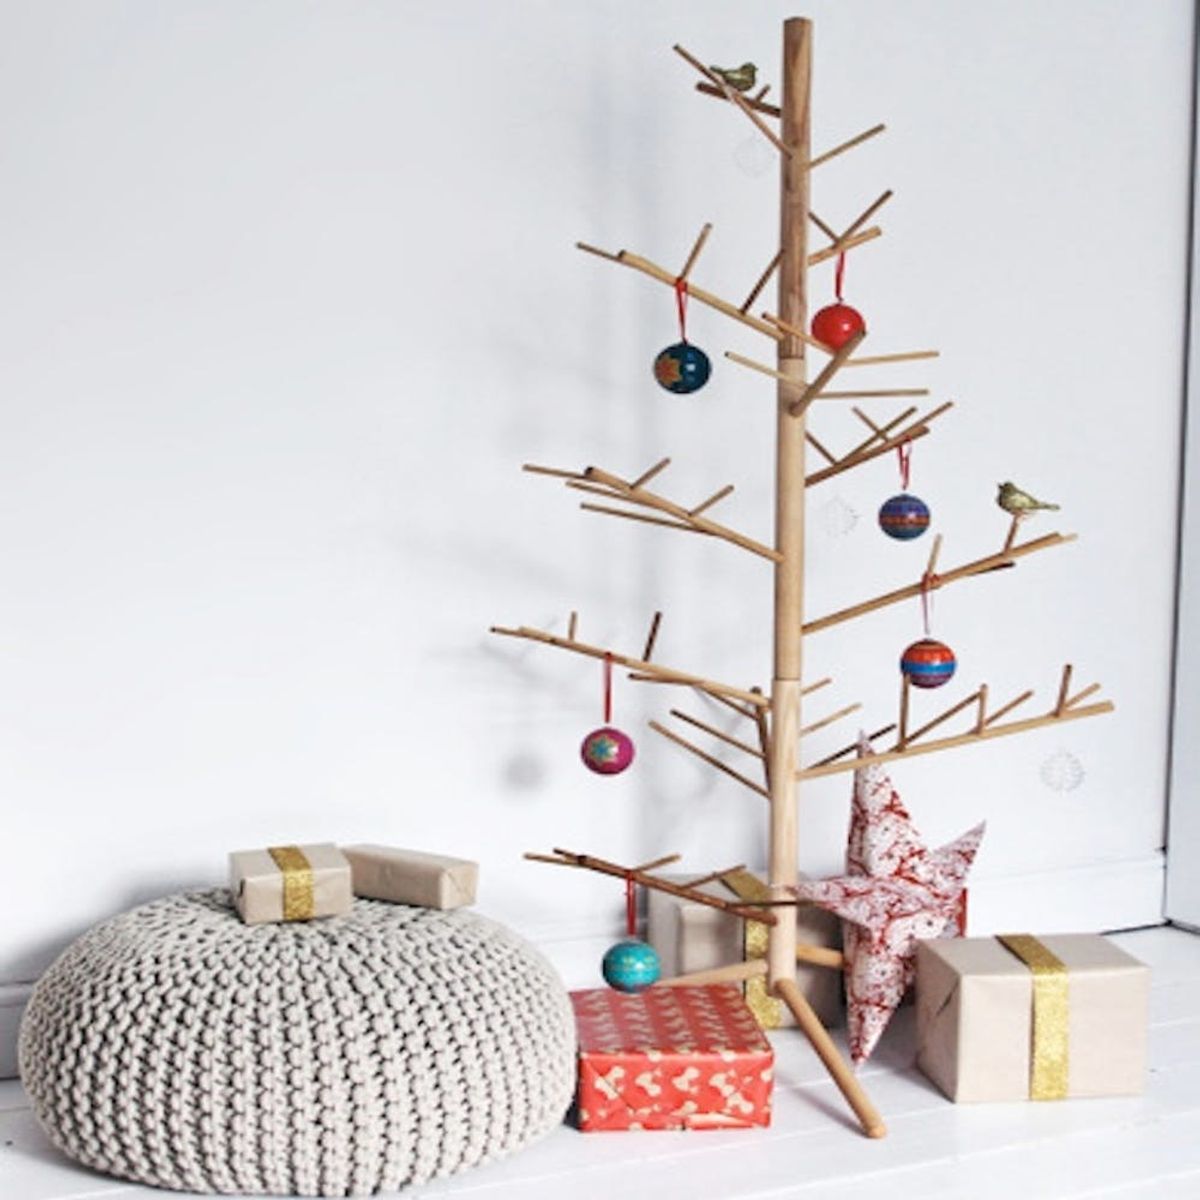 This Kickstarter Project Is the Perfect Christmas Tree for Minimalists